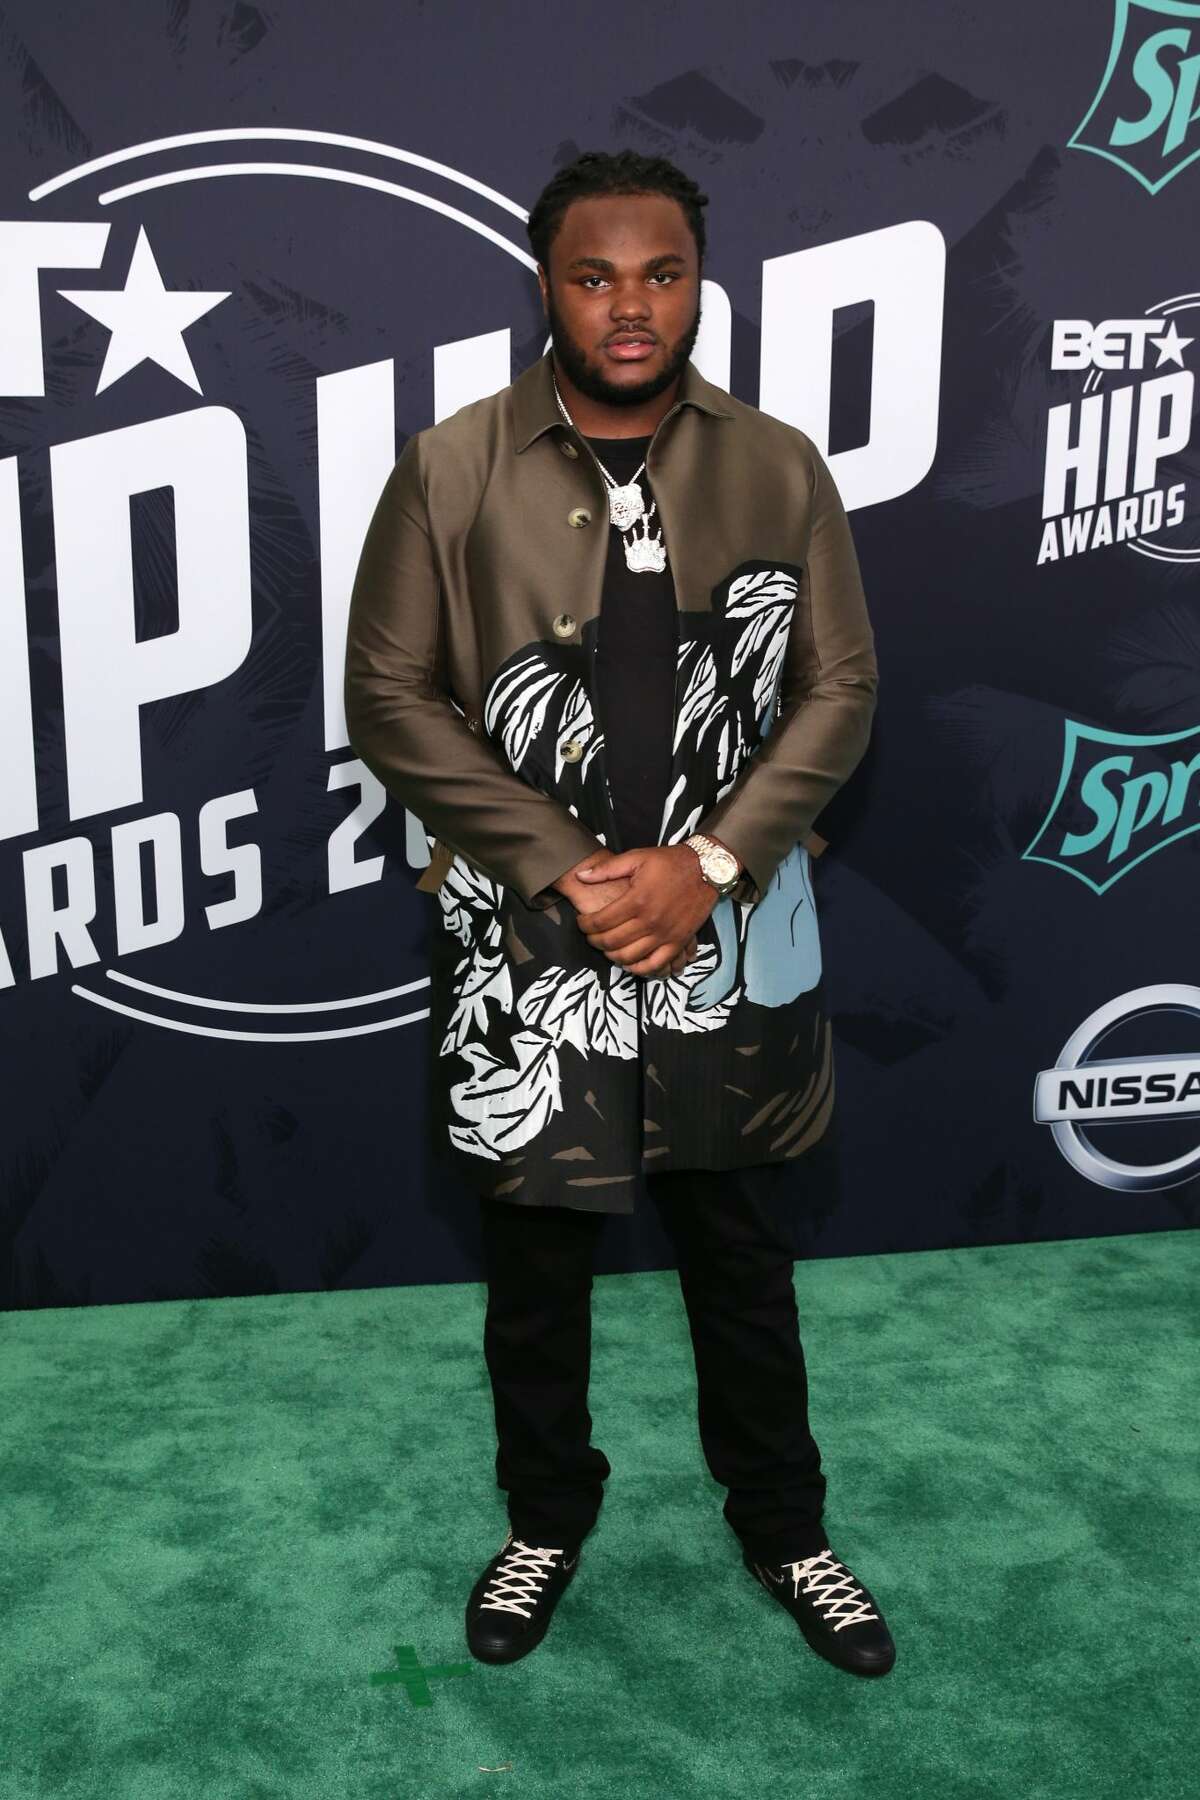 Best and worst dressed at the 2017 BET Hip Hop Awards